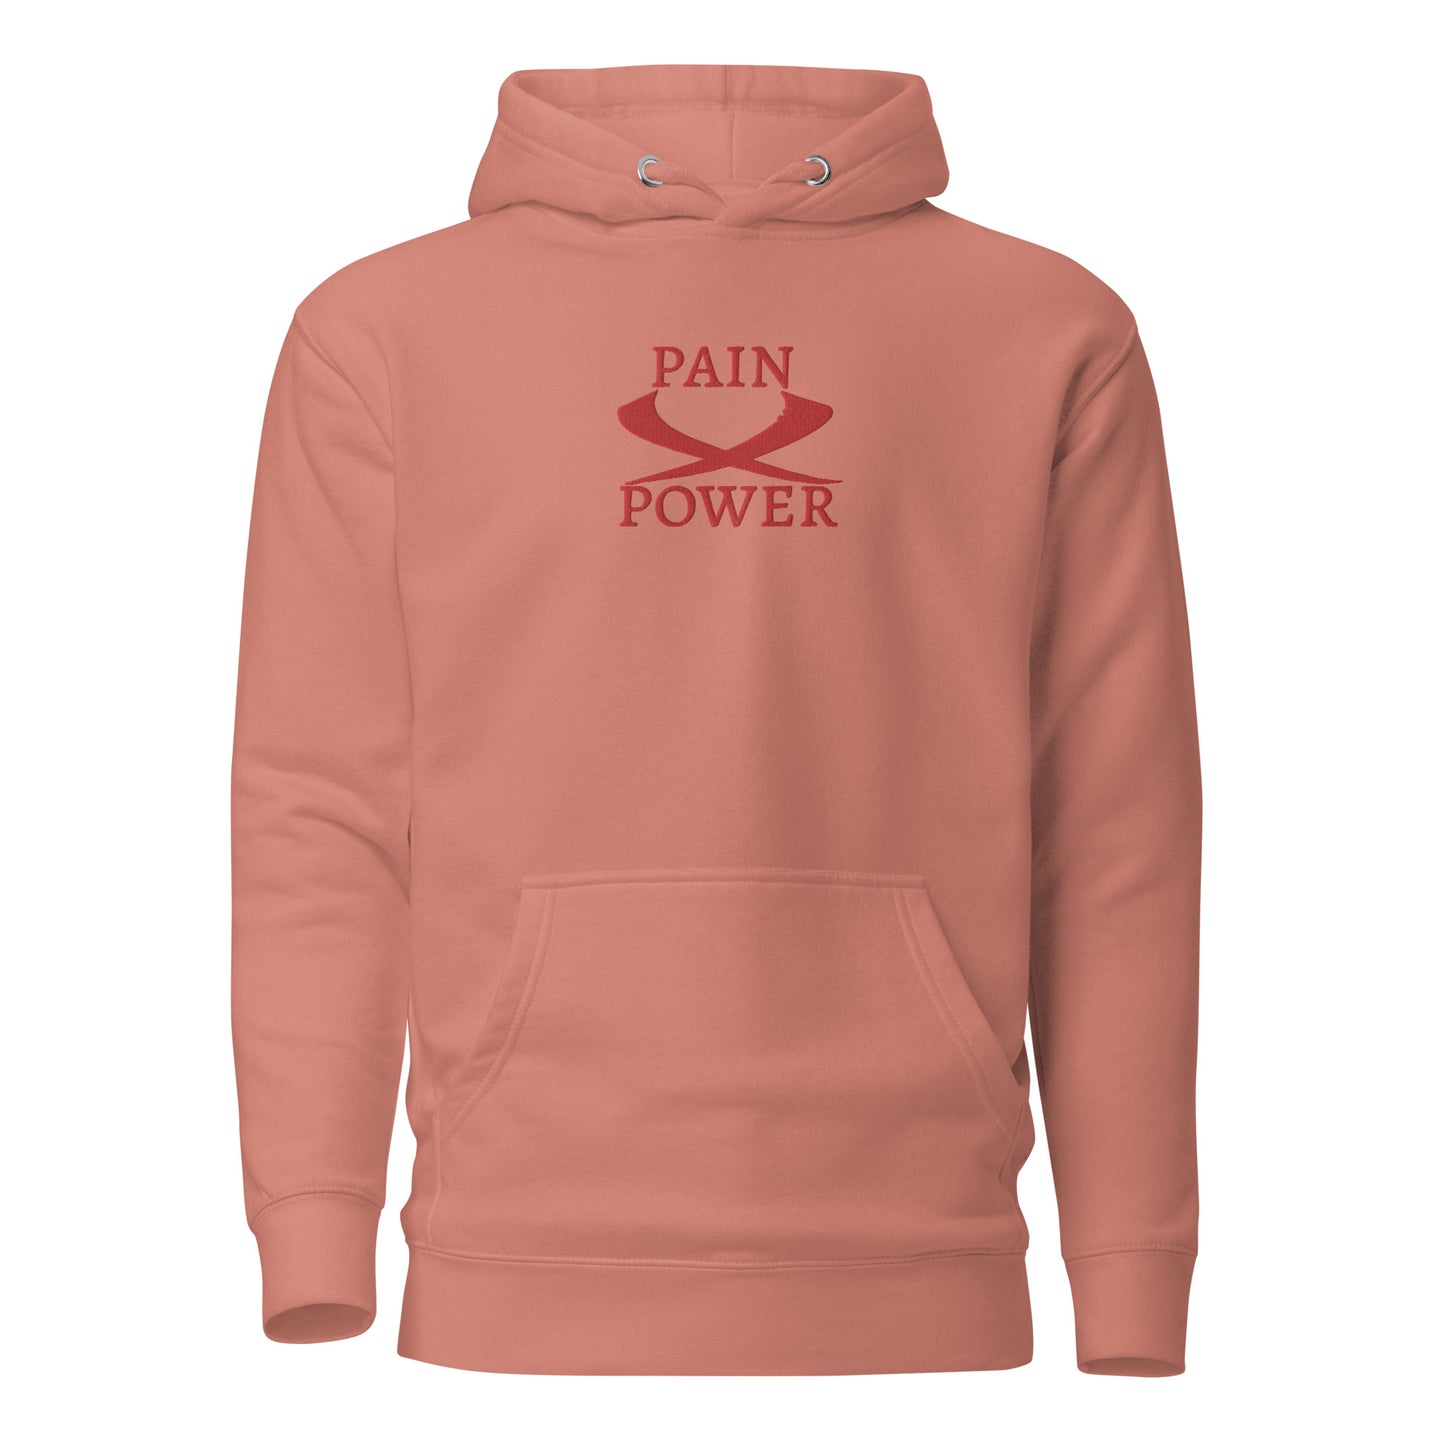 dusty rose   wrath   hoodie with pain and power embroidered at the center chest